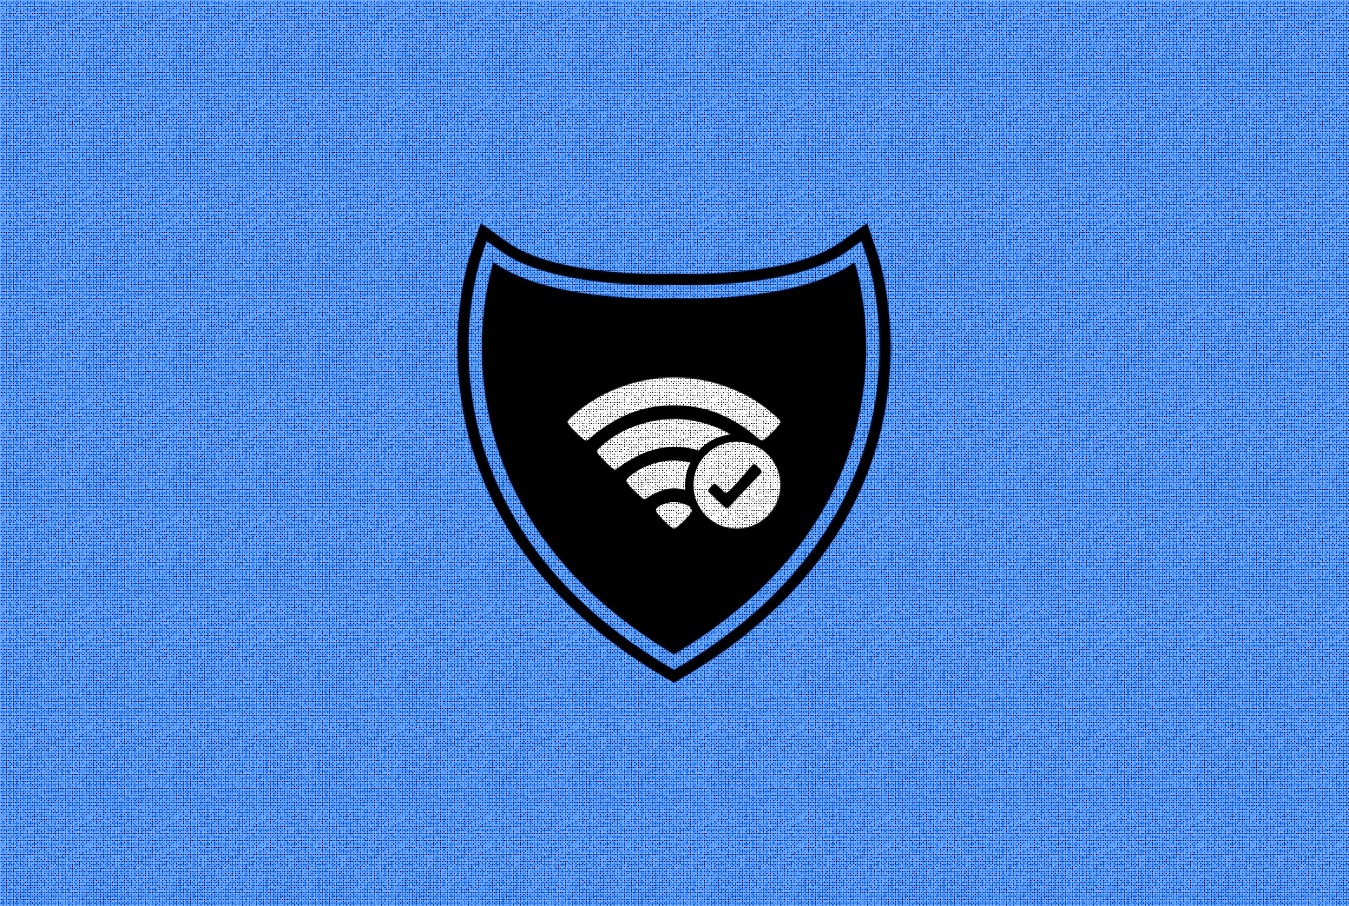 What you can use a VPN gor and why you should use one